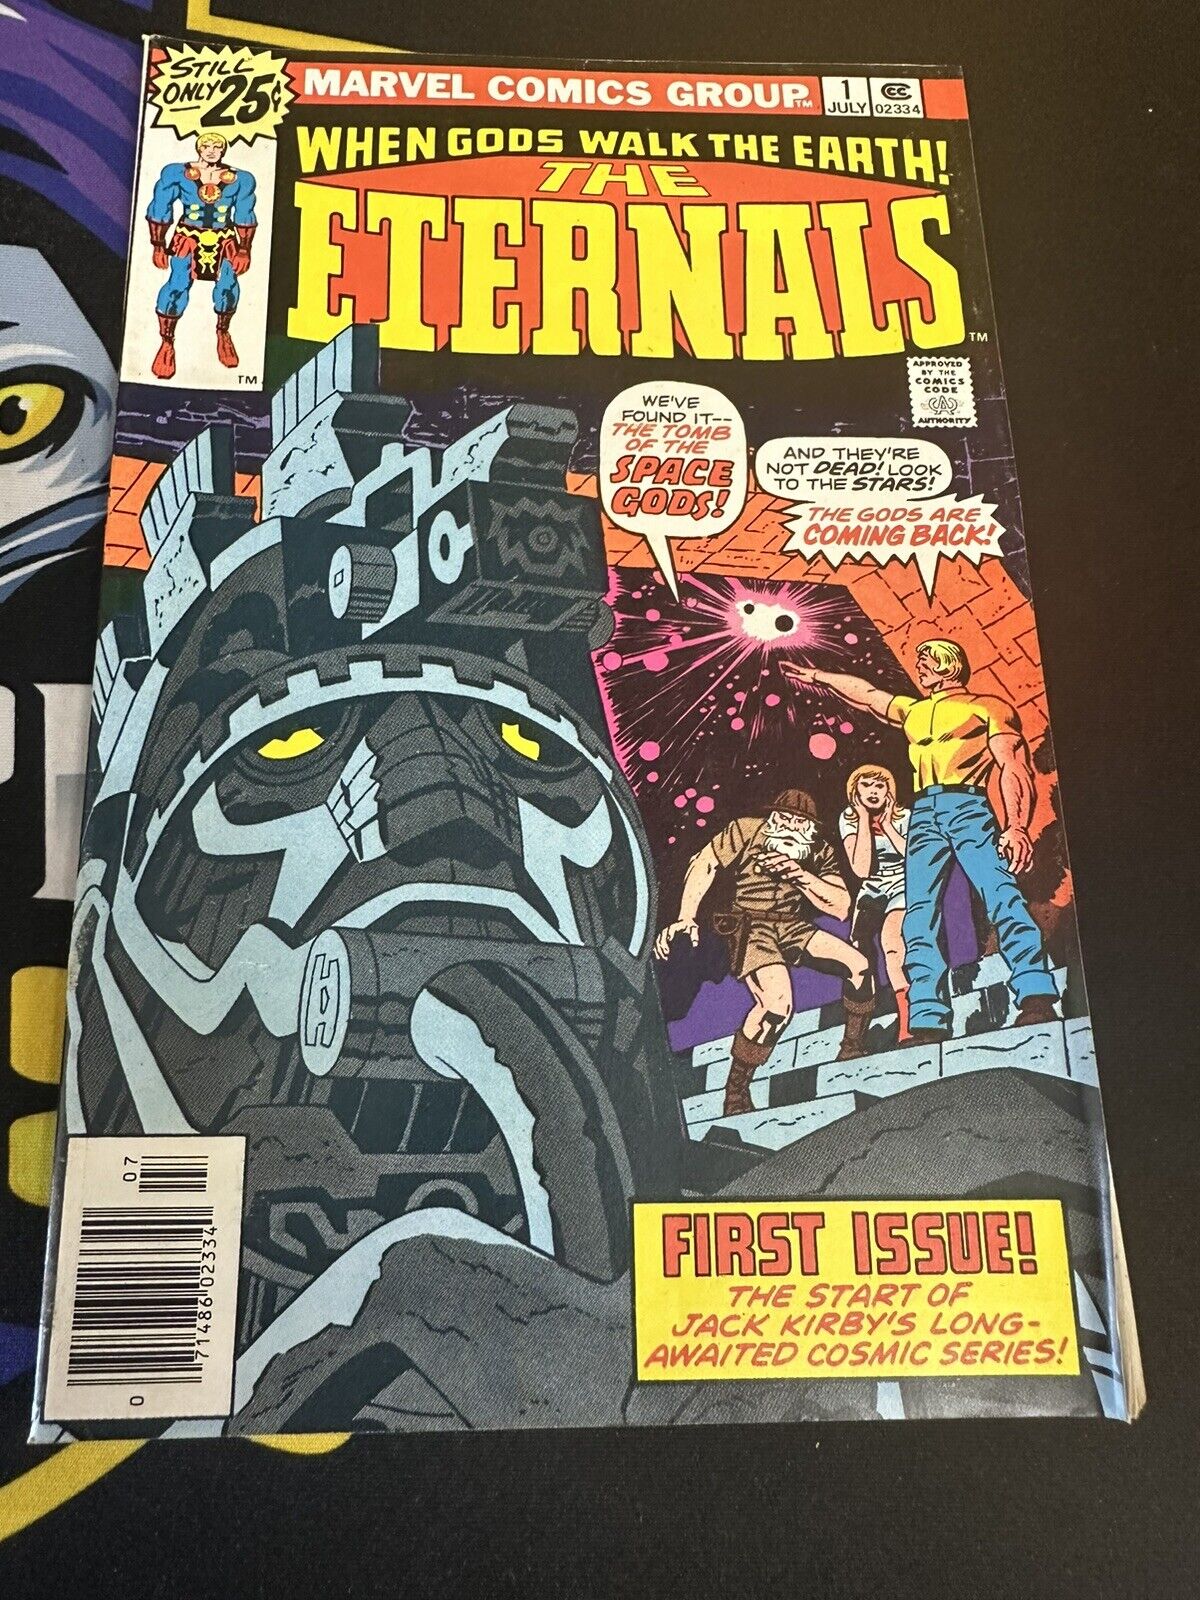 ETERNALS #1. JULY 1976. 1st Appearance and Origin Of Eternals.